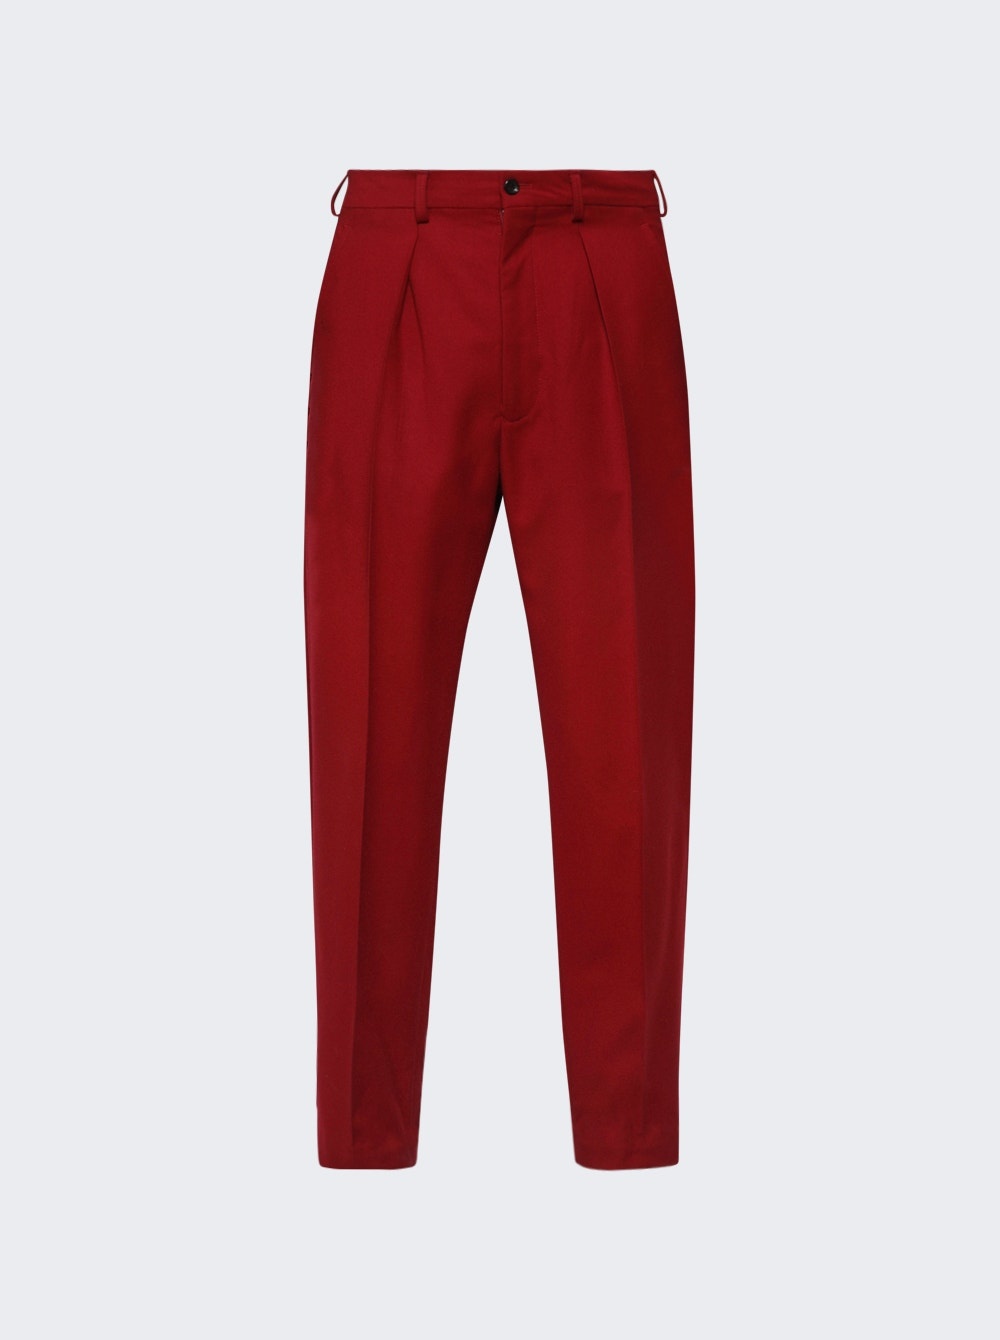 Solitaire Trouser Scarlet Red - 1